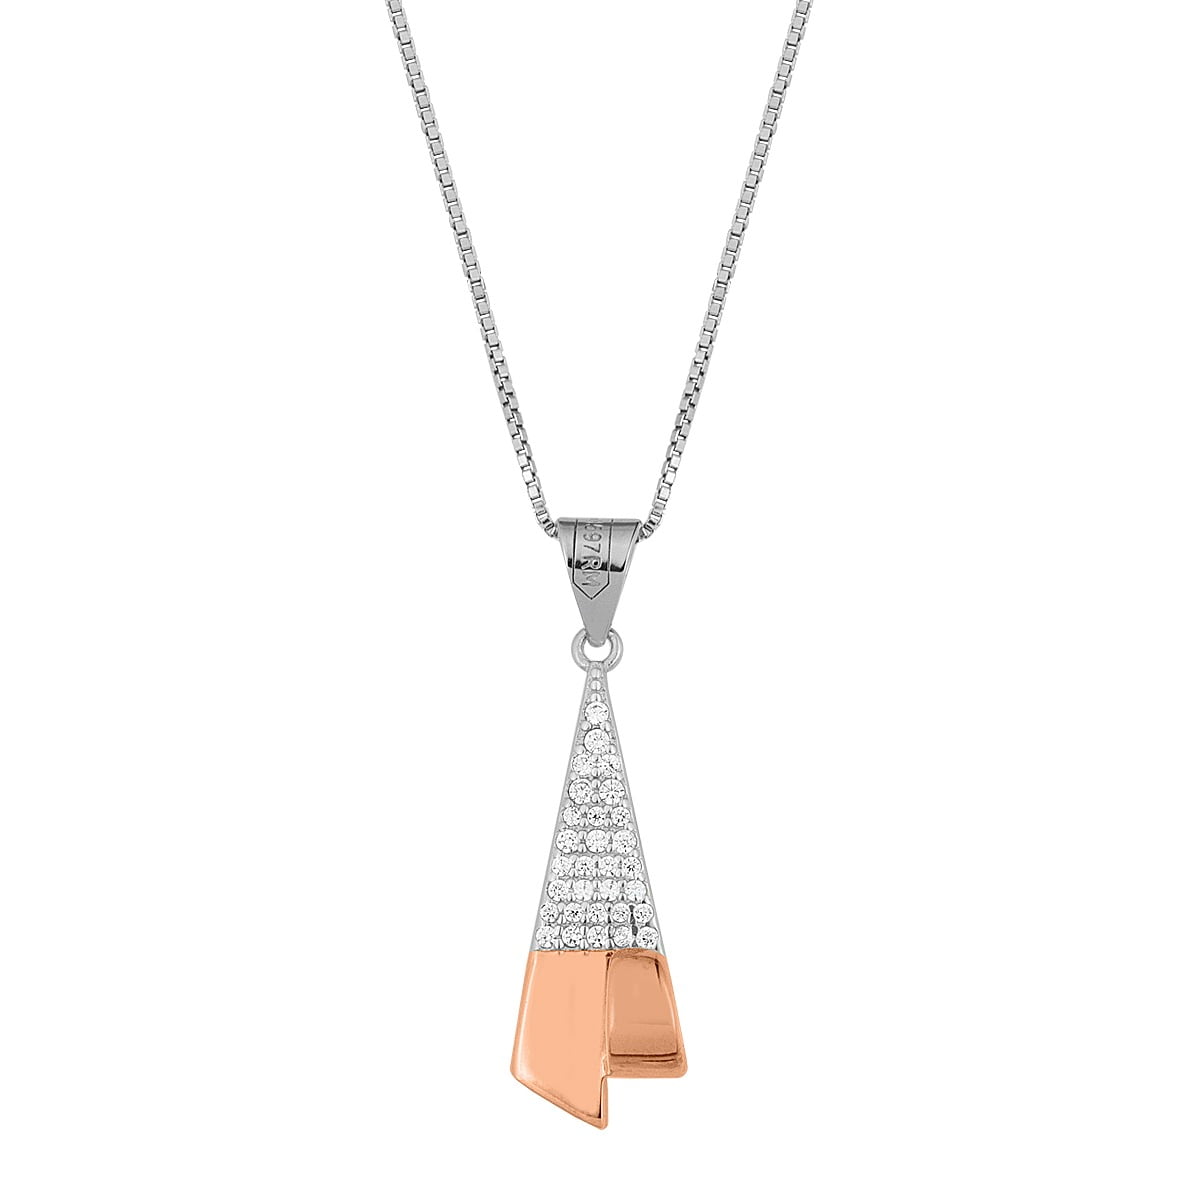 Pendant "Ribbon" tie, in sterling silver 925°, with white zircons and rose gold plating. Accompanied by a 925° silver chain.